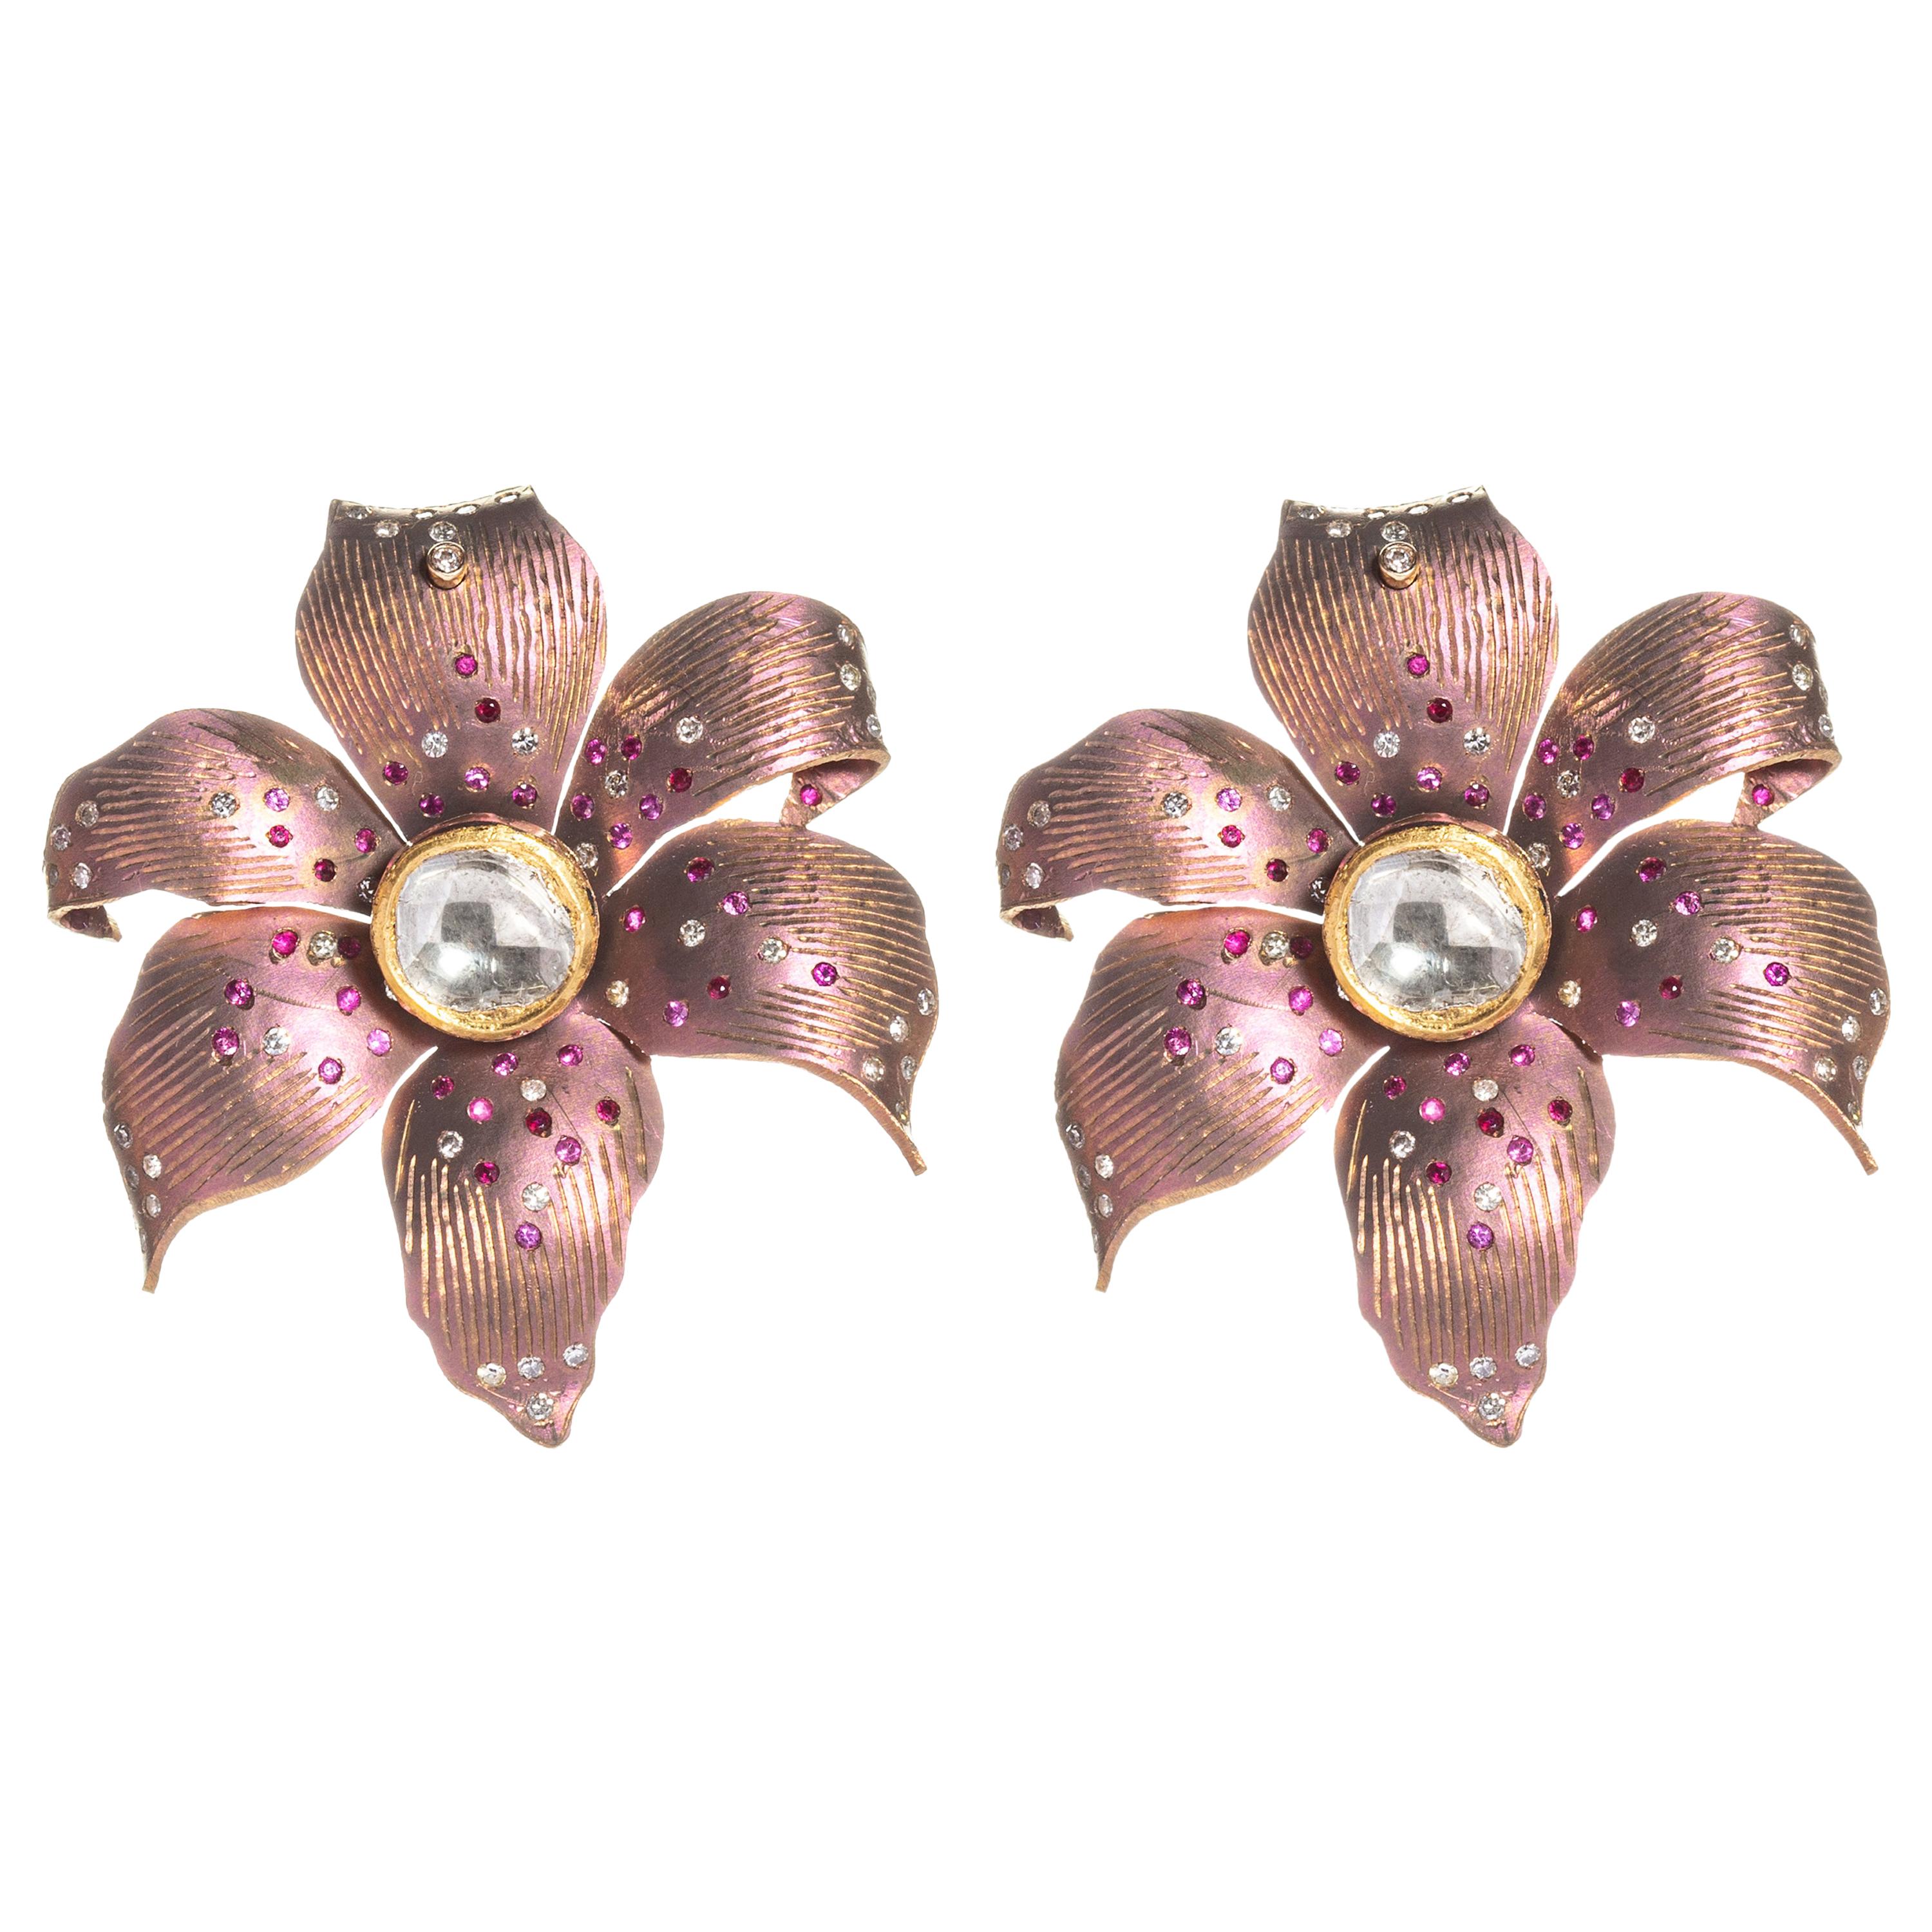 Rose-Tinted Titanium Flower Earrings with Removable Uncut Diamonds